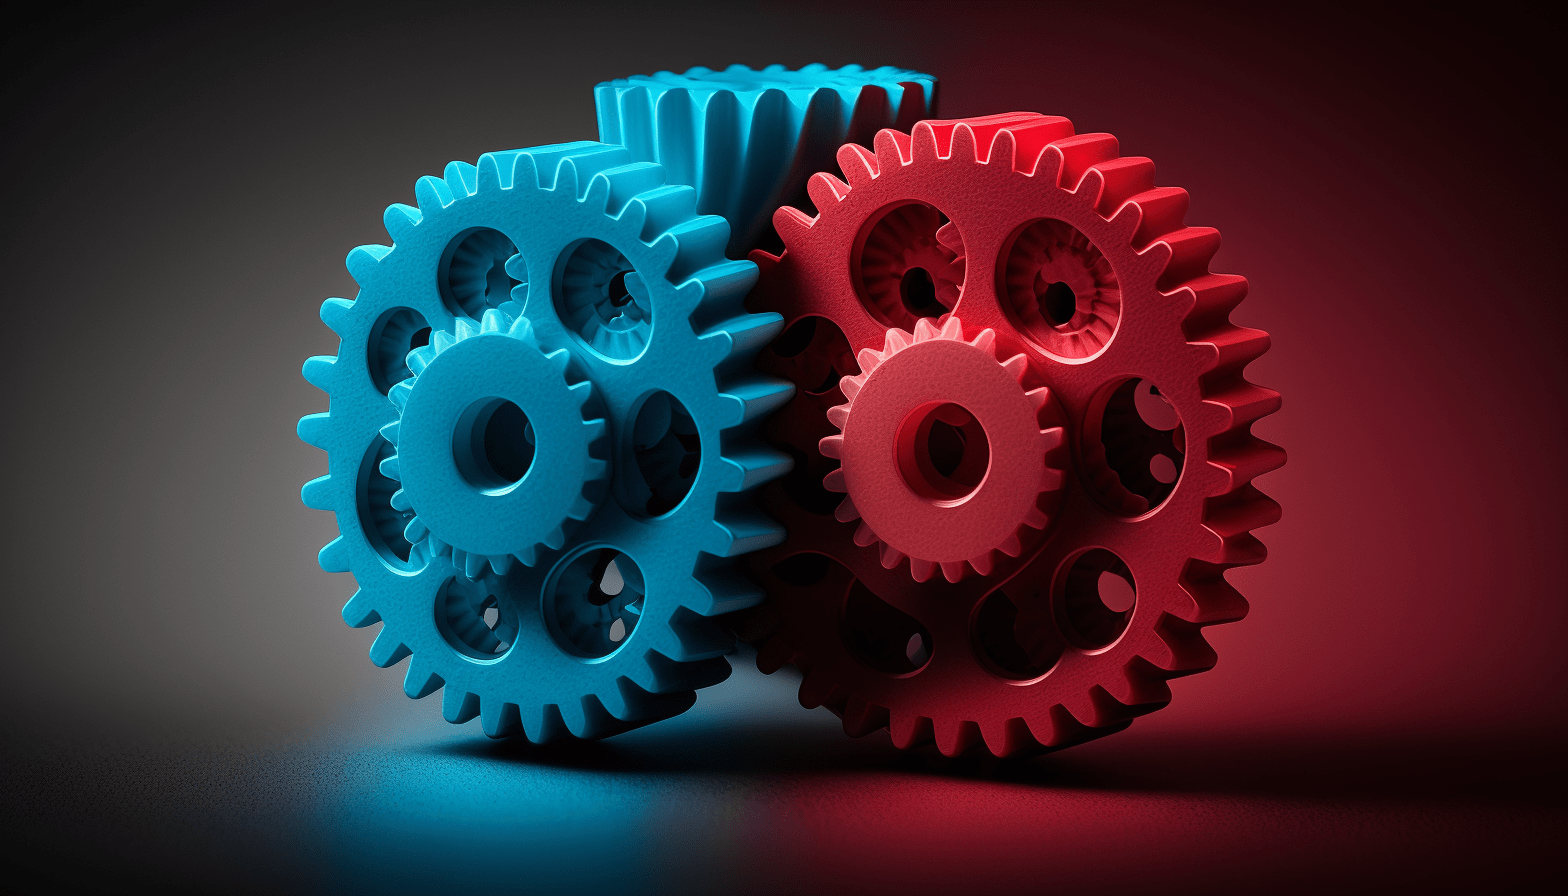 An image of three gears, colored red, blue, and blue, interlocked and turning together to symbolize their integration and collaboration in automating cybersecurity processes